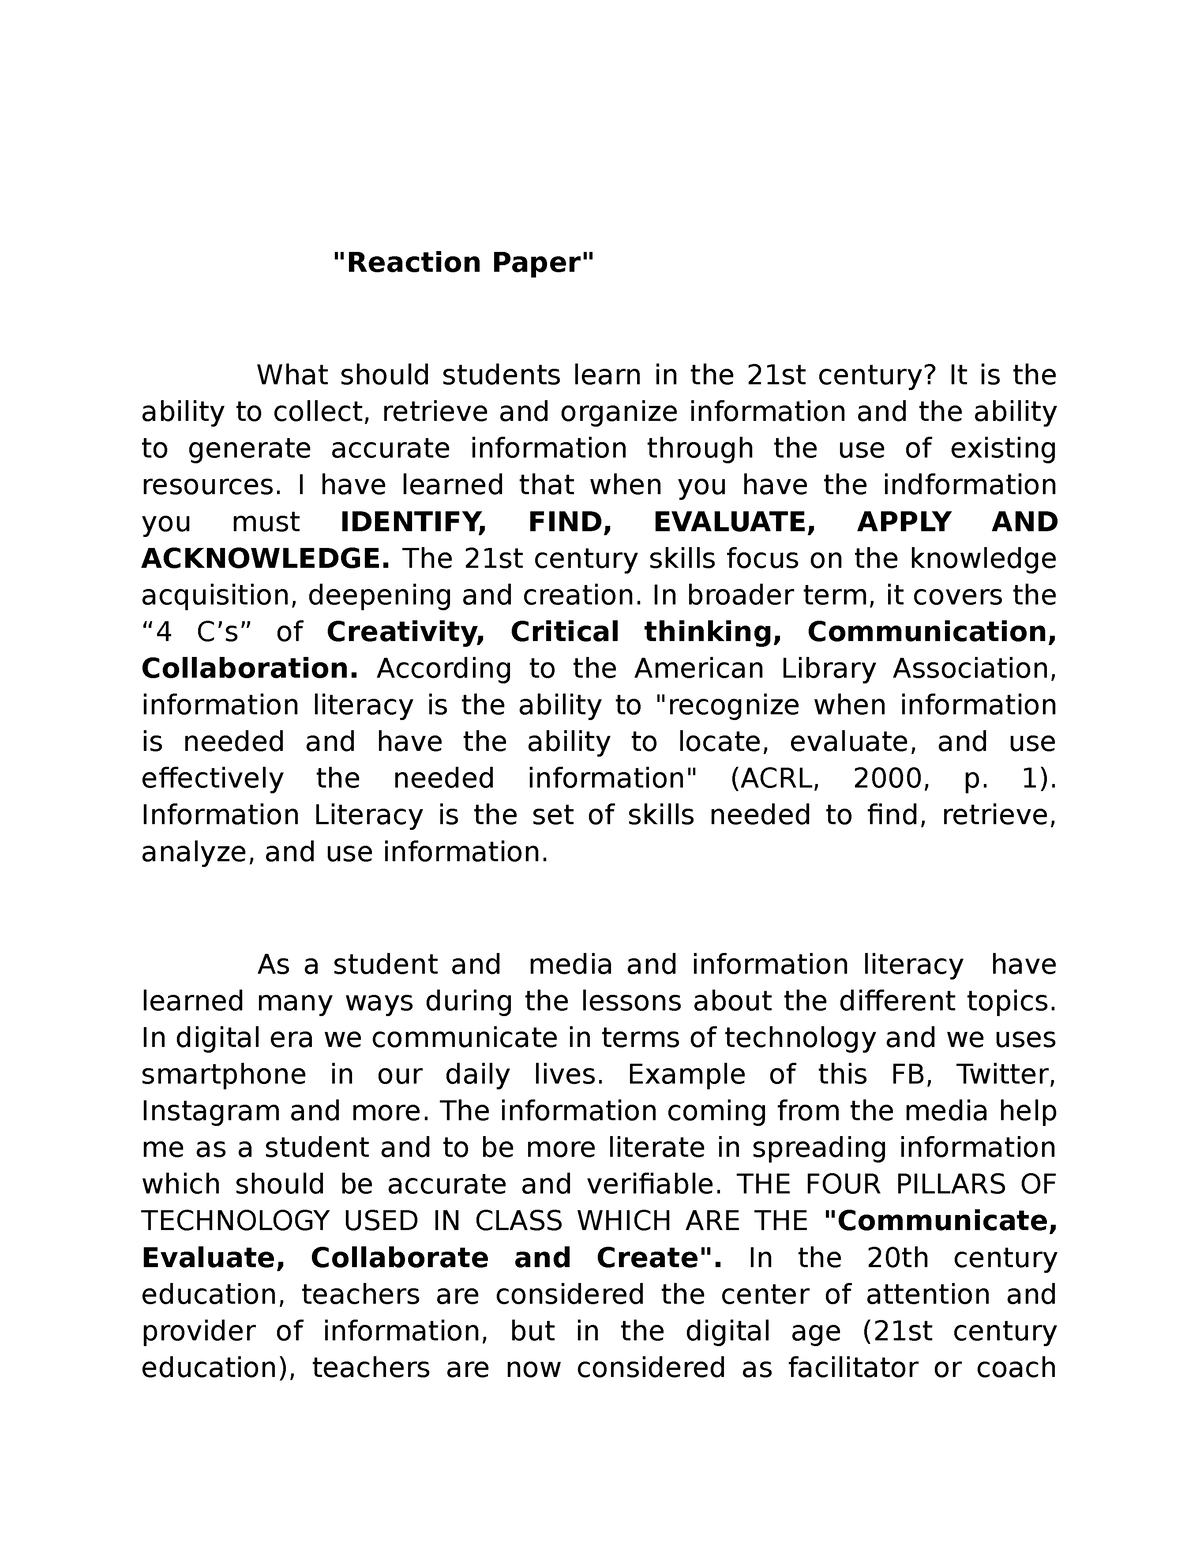 essay in media and information literacy